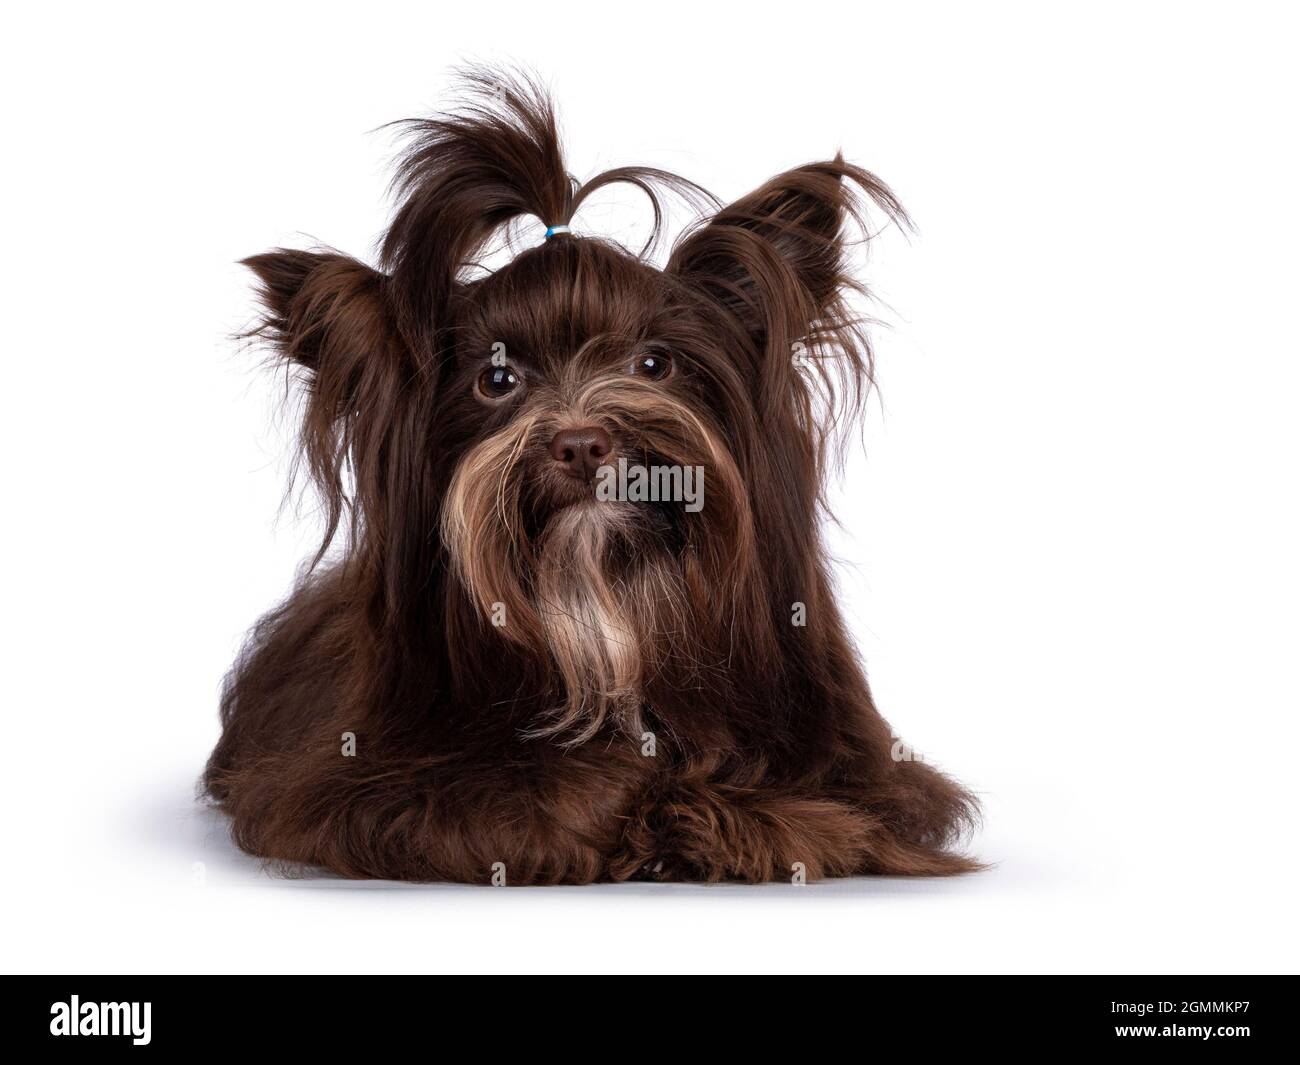 https://c8.alamy.com/comp/2GMMKP7/cute-little-1-year-old-dark-brown-yorkshire-terrier-dog-laying-down-face-front-hair-in-pony-tail-on-head-looking-towards-camera-isolated-on-white-2GMMKP7.jpg